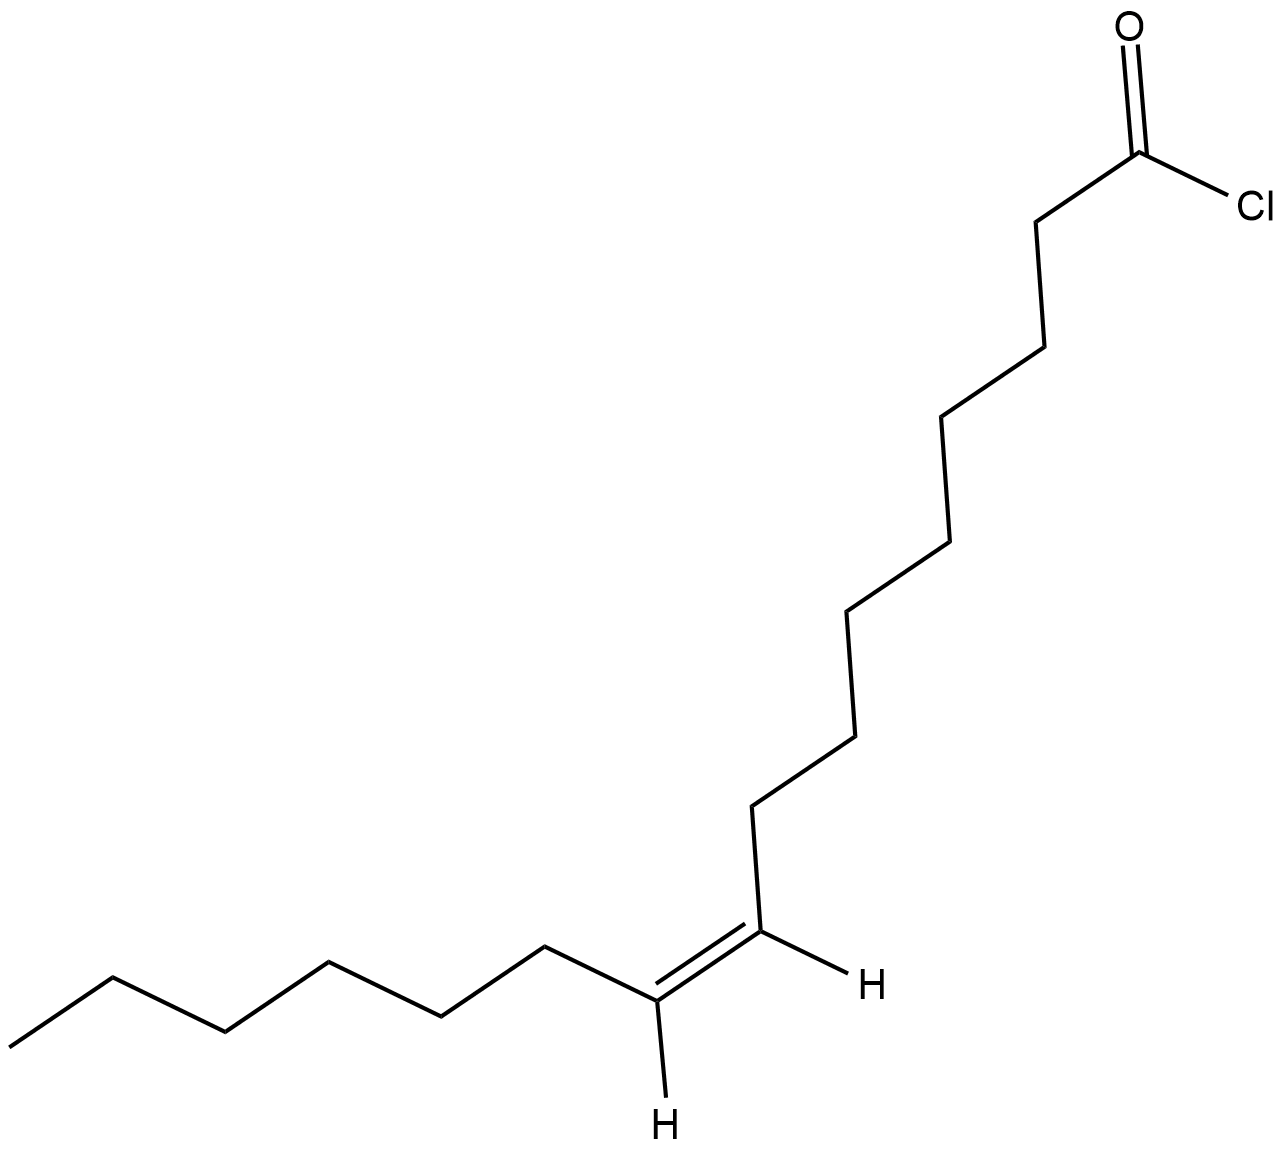 Palmitoleoyl Chloride Chemical Structure